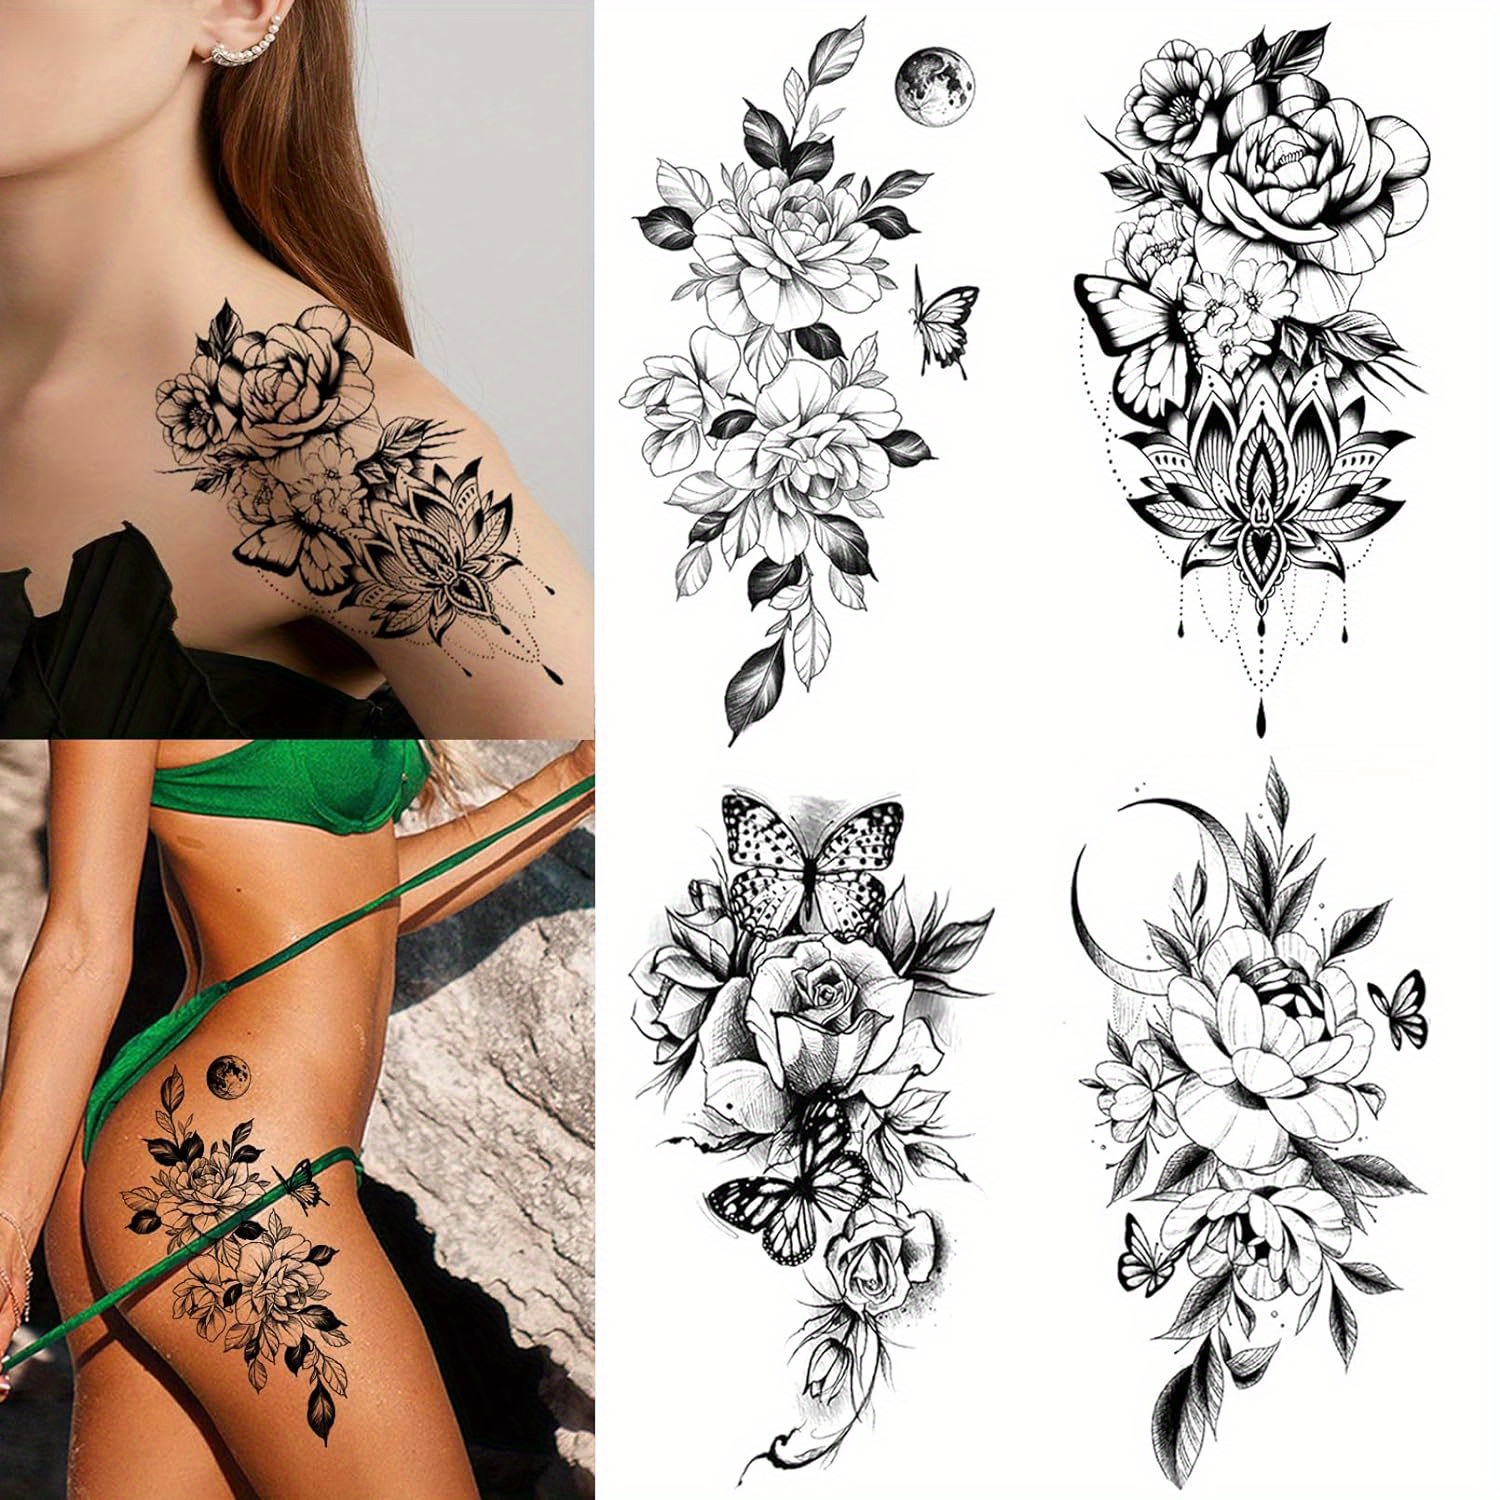 

10 Sheets Flower Butterfly Temporary Tattoos For Women Girls, Large Waterproof Arm Adults Fake, Realistic That Look Real Last Long Tattoo Stickers Party Gifts